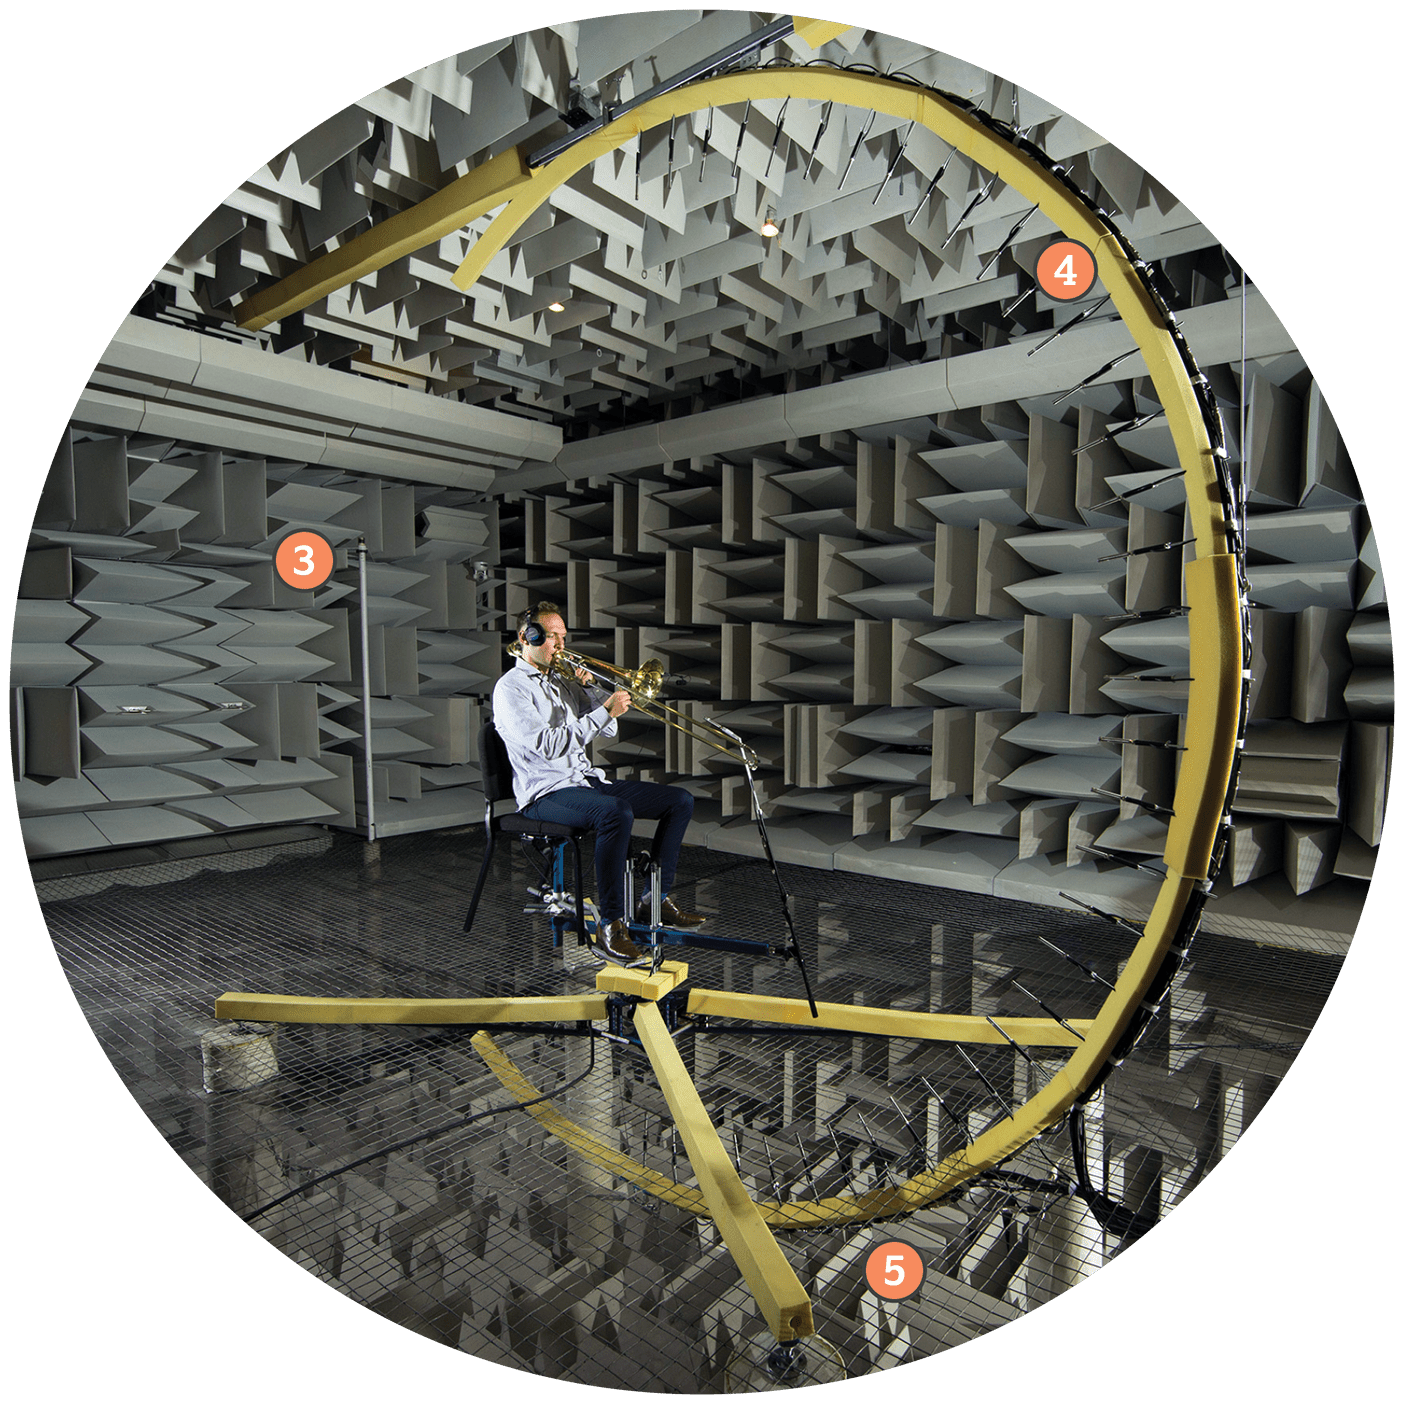 BYU's anechoic chamber with a large circular array of microphones surrounding a trumpet player.